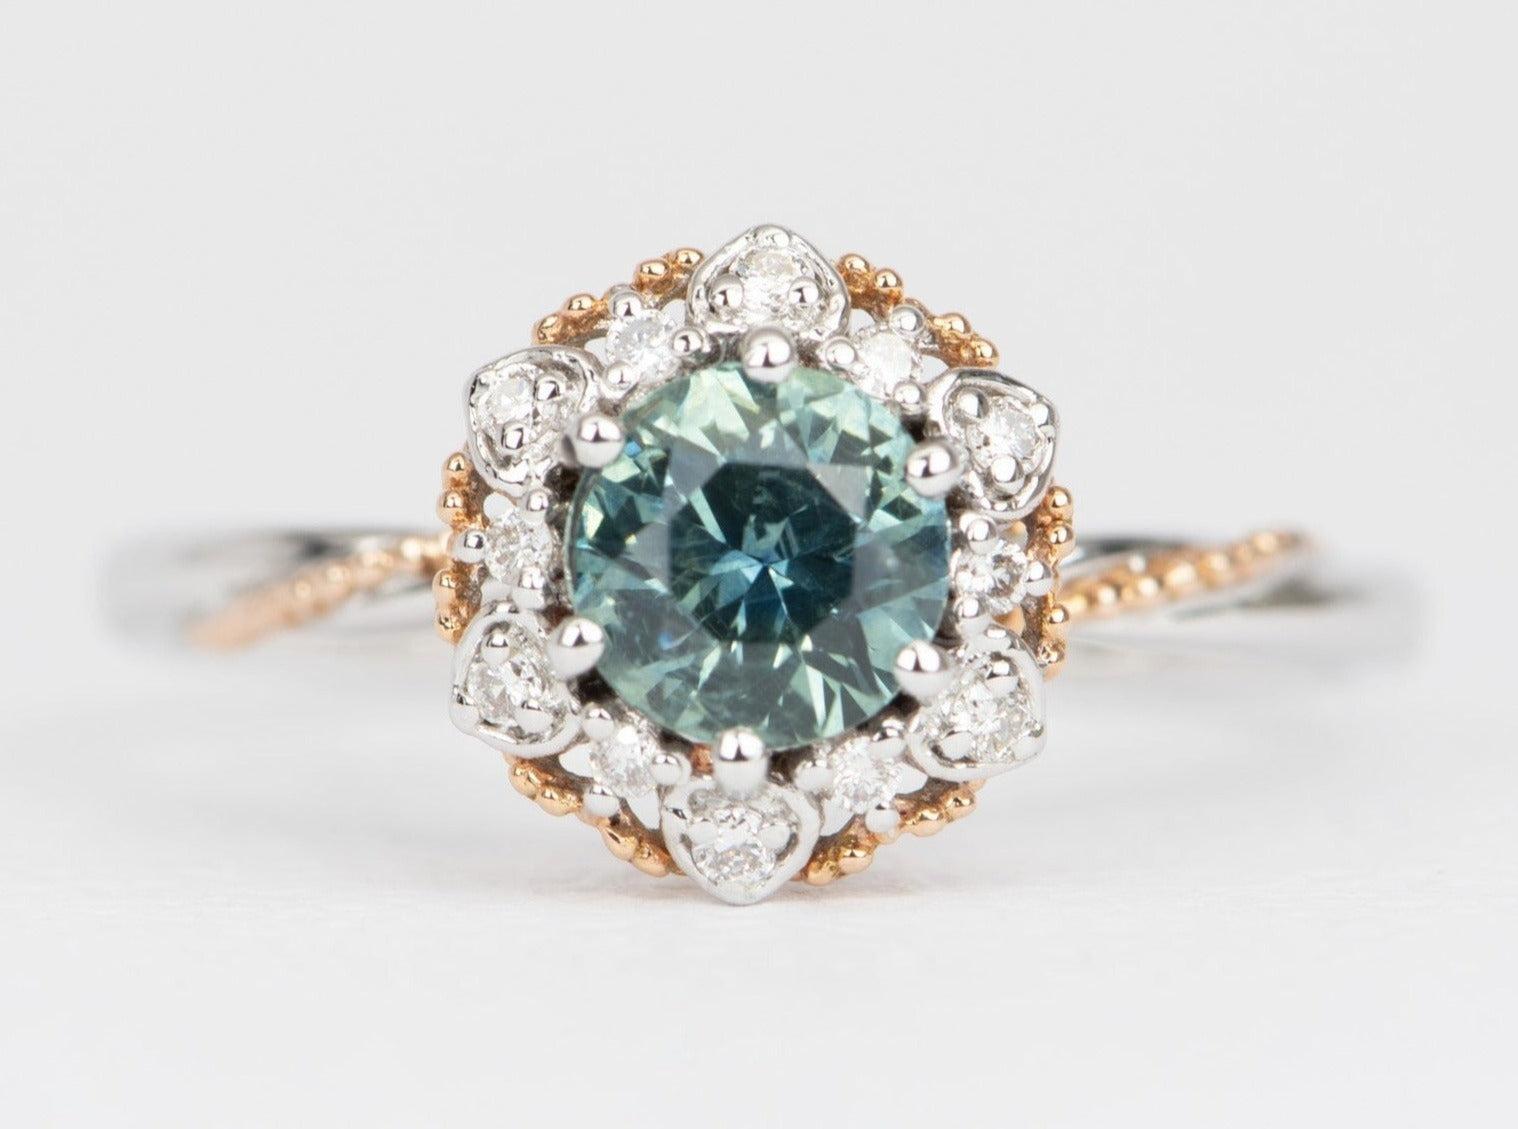 A beautiful teal blue Montana sapphire in the center, adds a pop of color and individuality to the piece, making it a special choice for an engagement ring. The floral style of the ring adds a touch of elegance and femininity, making it a perfect